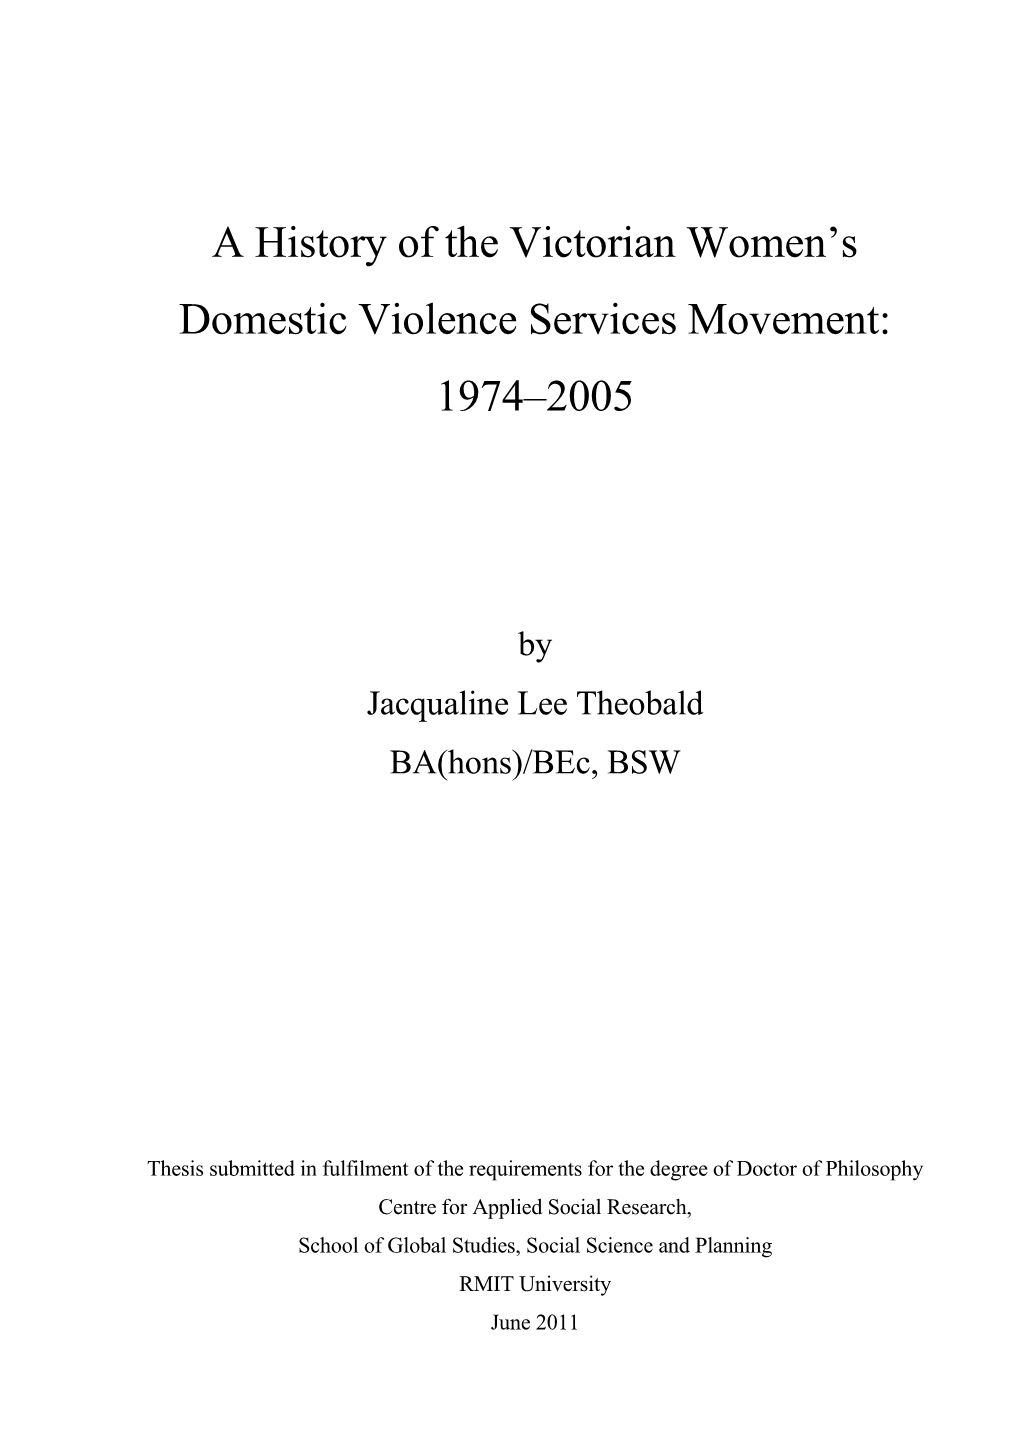 A History of the Victorian Women's Domestic Violence Services